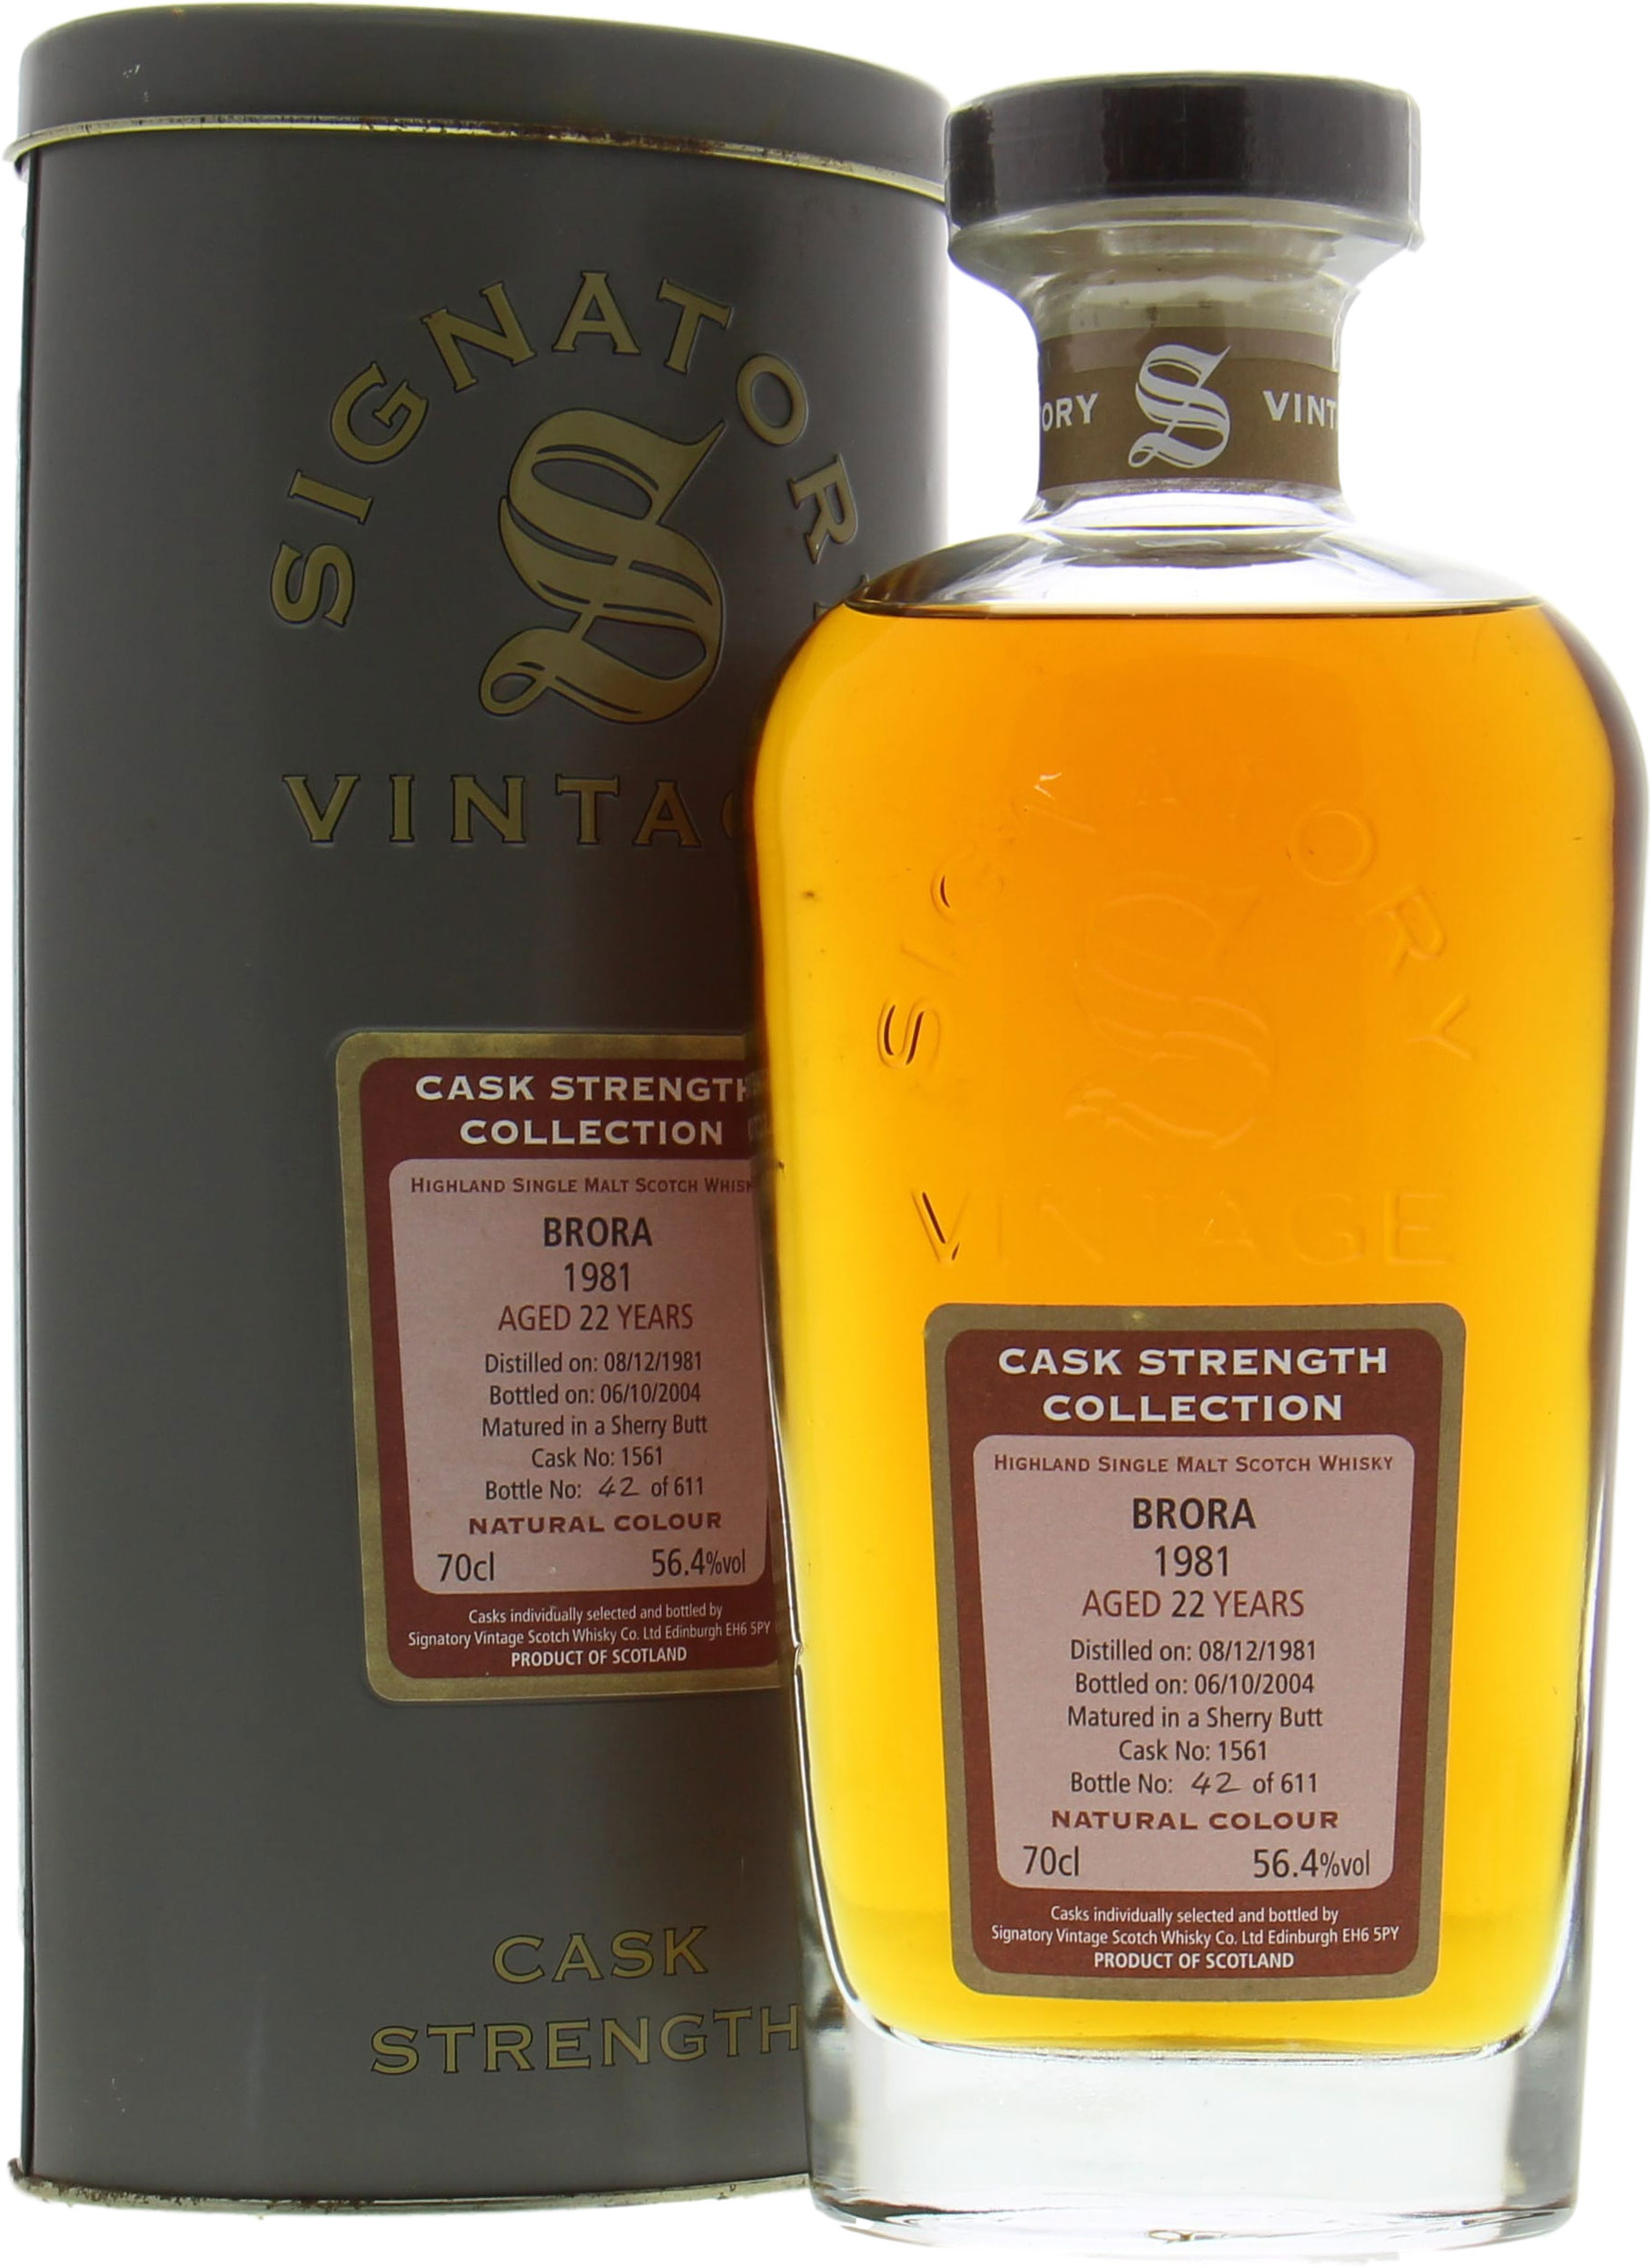 Brora - 22 Years Old Signatory Vintage Cask Strength Cask:1561 56.4% 1981 In Original Container